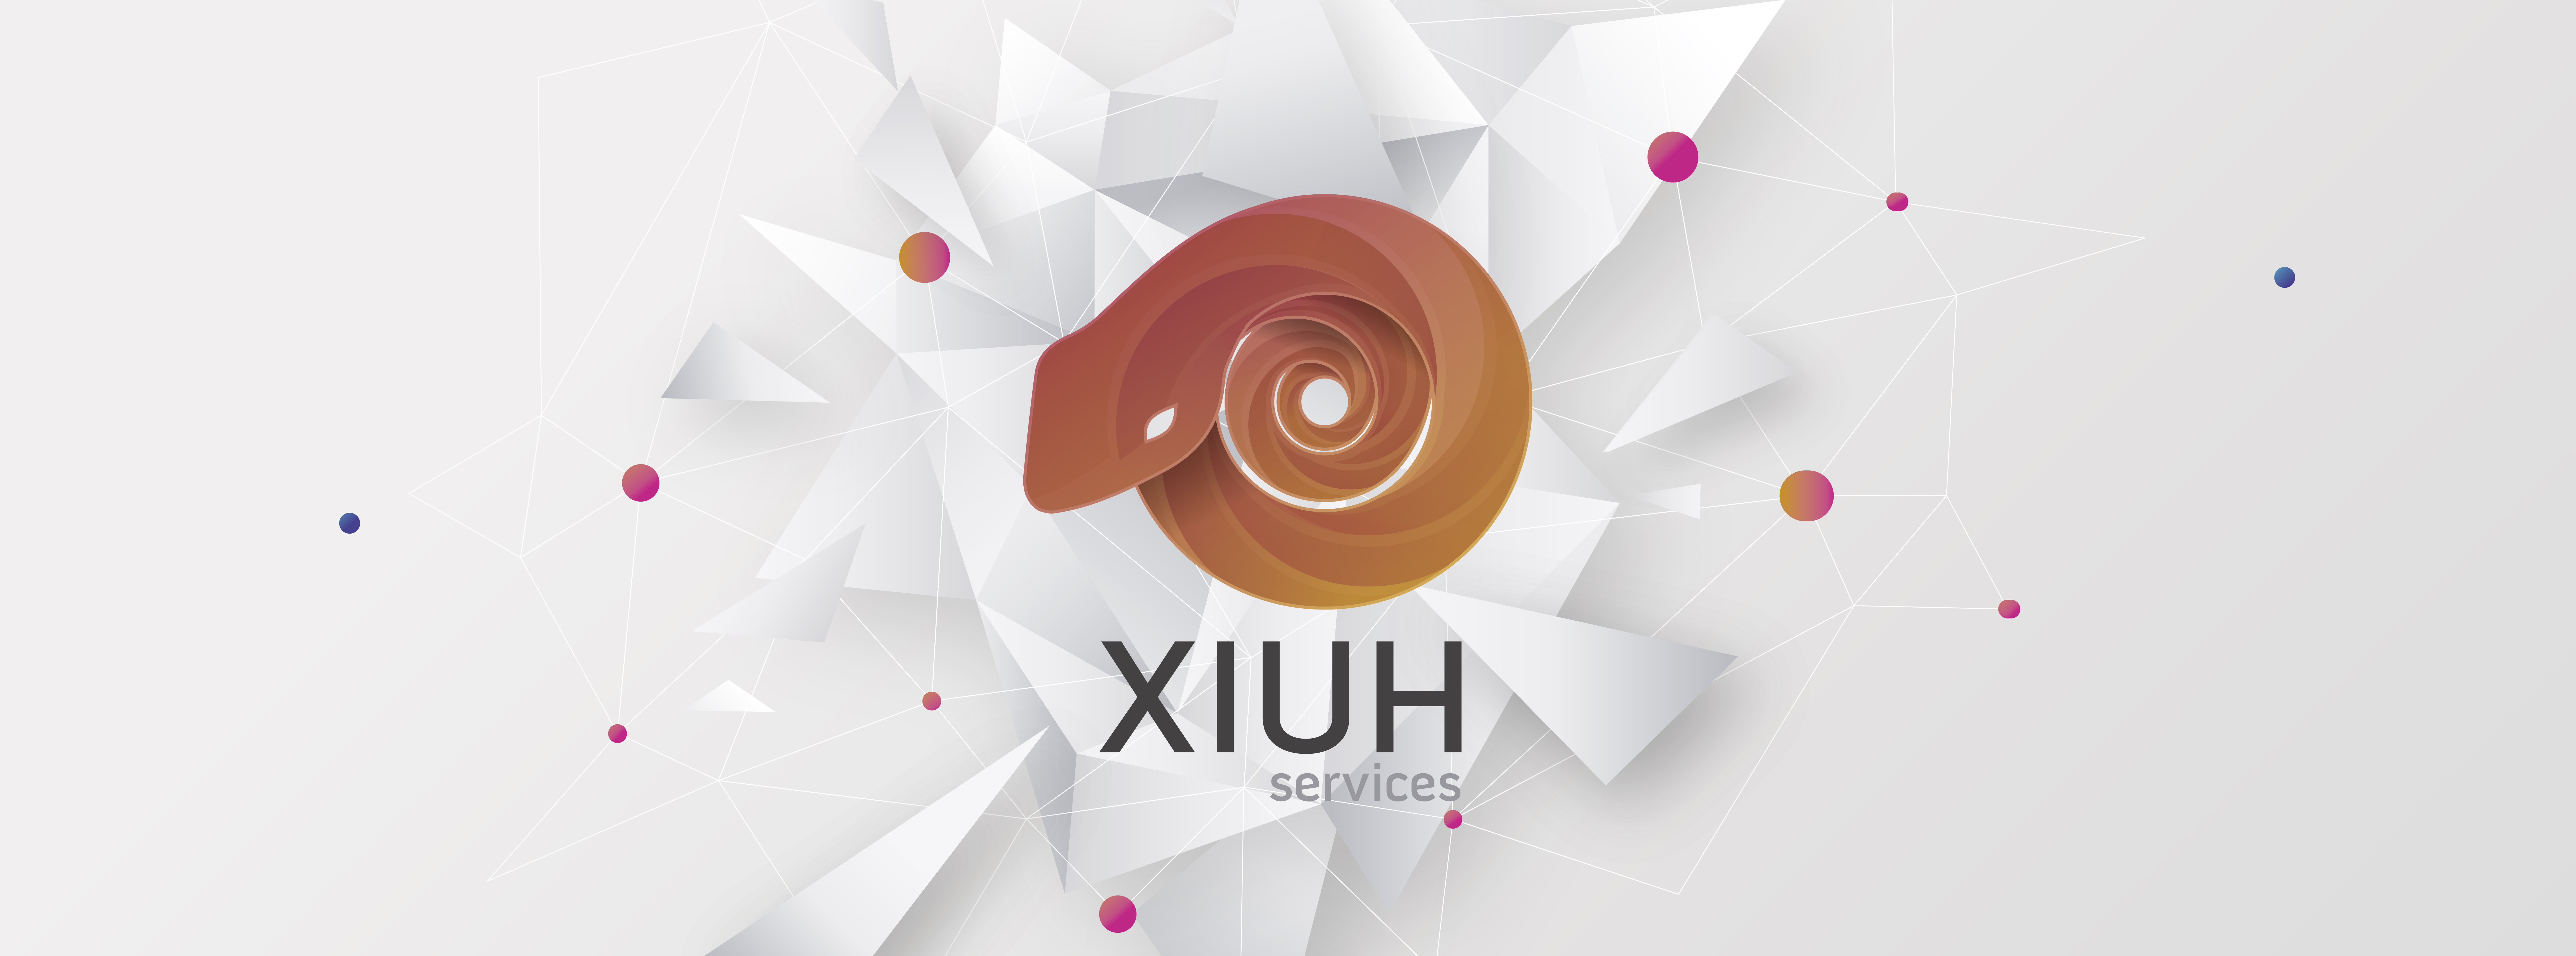 XIUH SERVICES